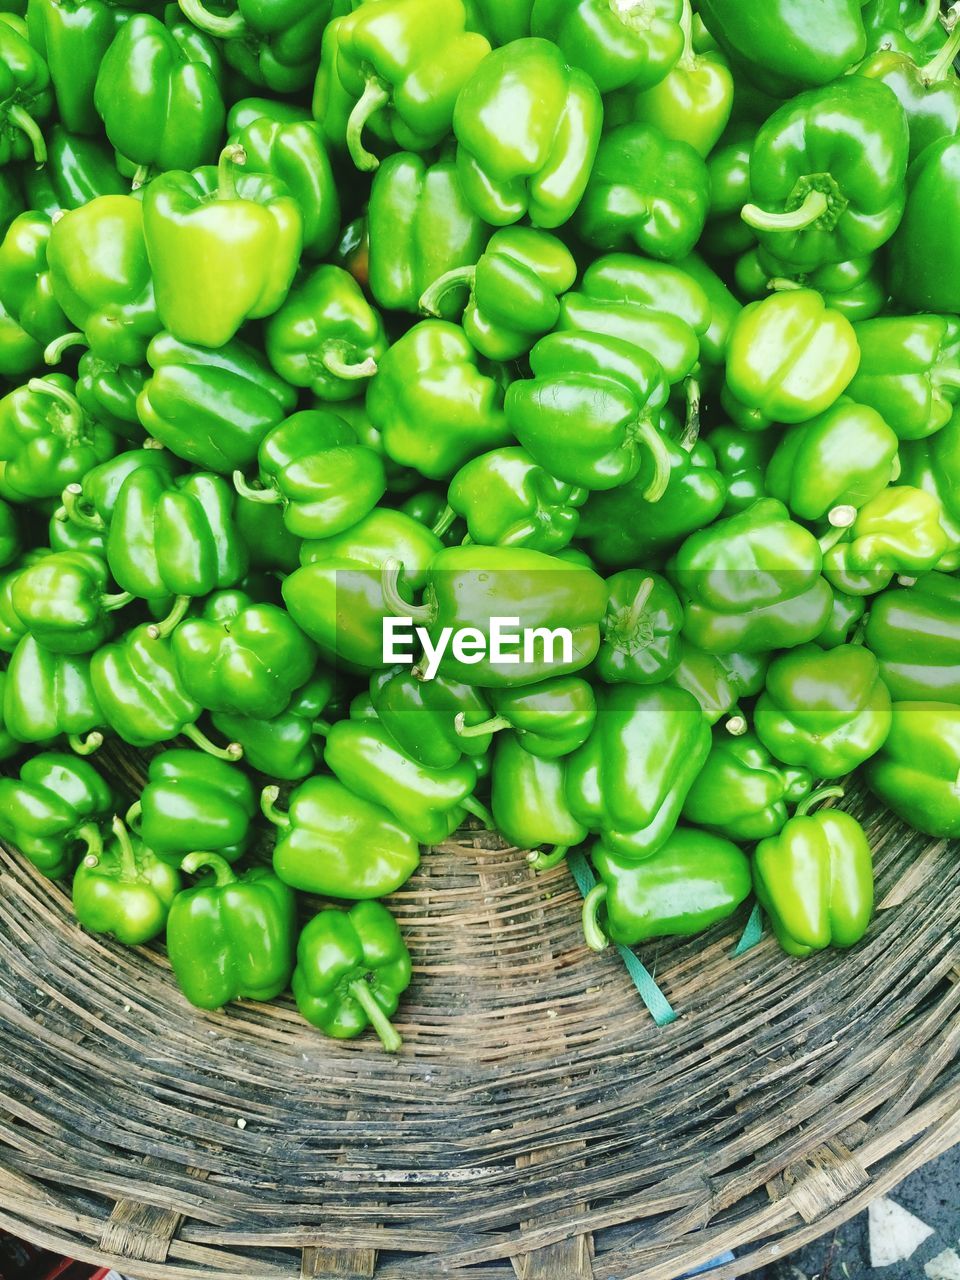 High angle view of green bell peppers in wicker basket for sale